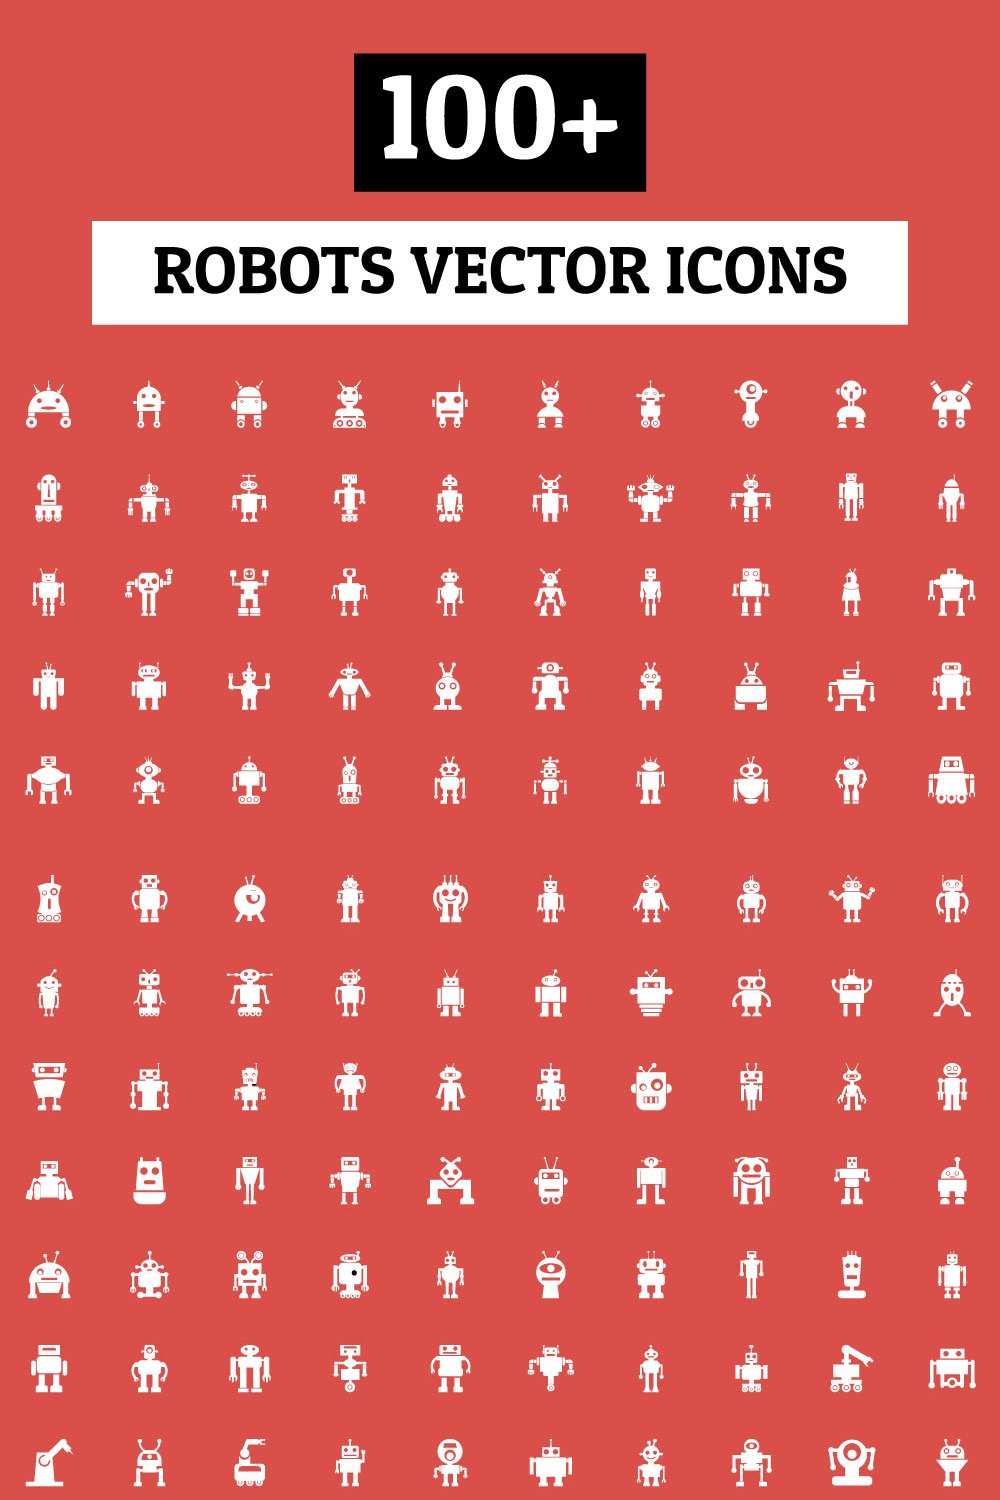 Illustrations 100 robots vector icons of pinterest.